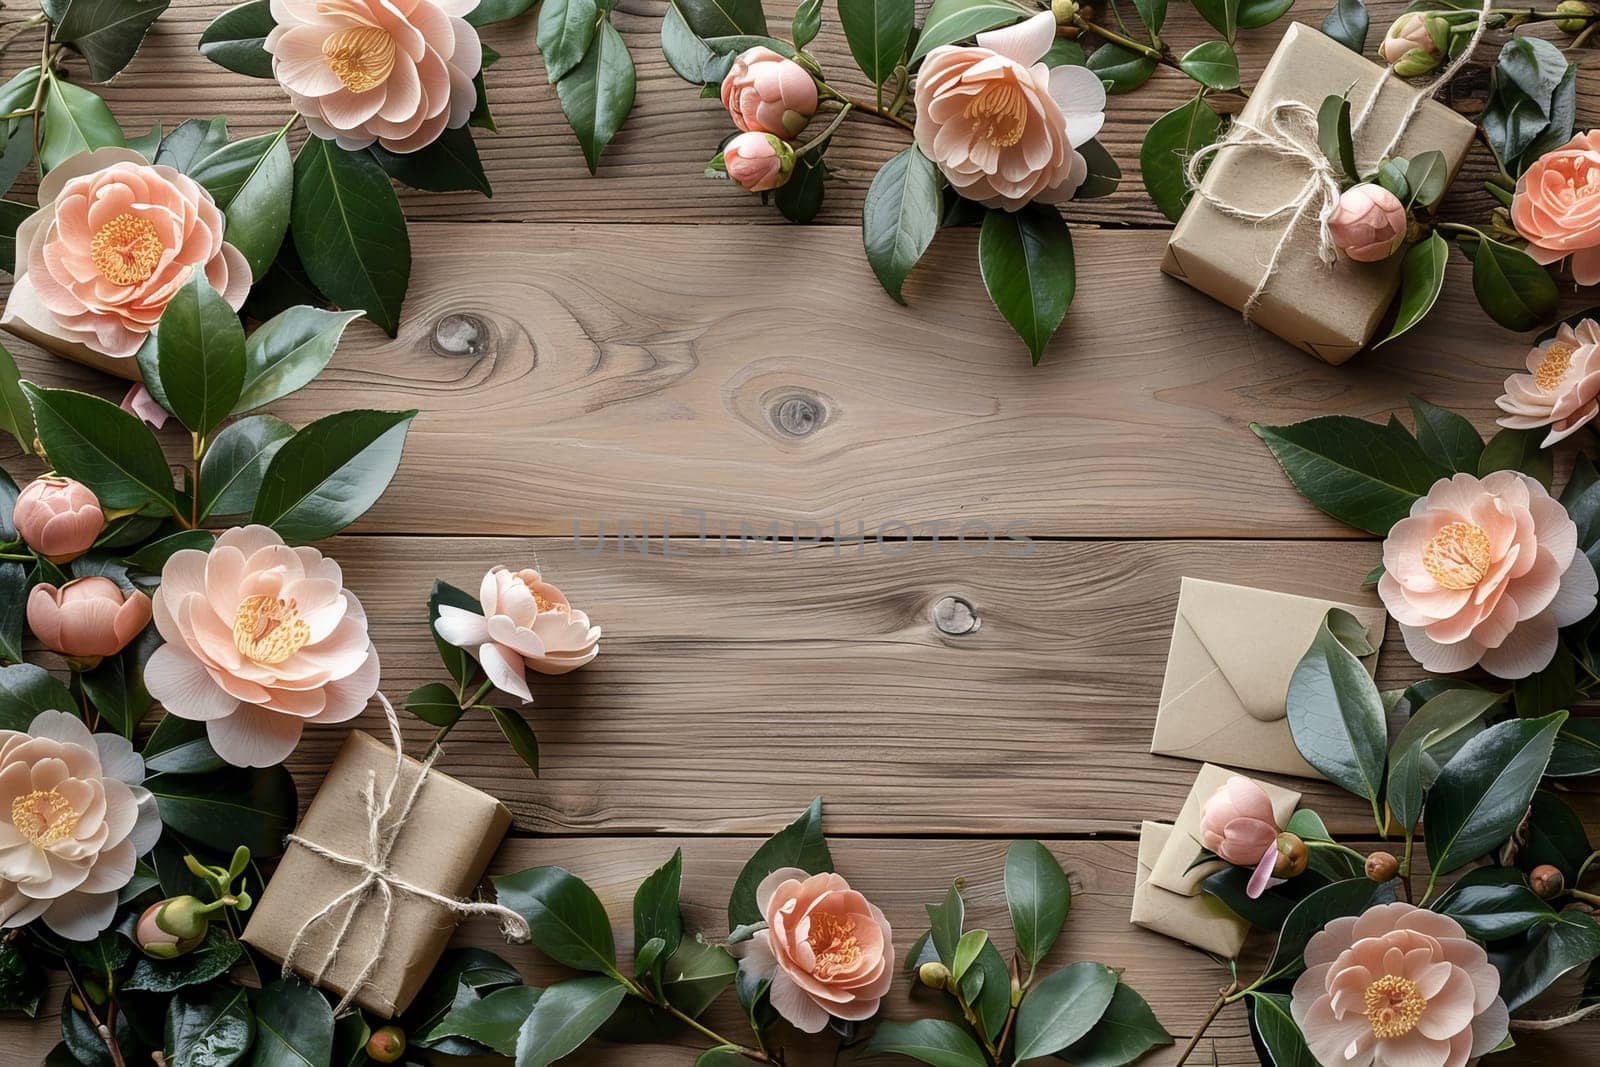 A wooden table with a bunch of brown boxes and flowers on it. The boxes are wrapped in brown paper and tied with string. The flowers are white and arranged in a way that they complement the boxes